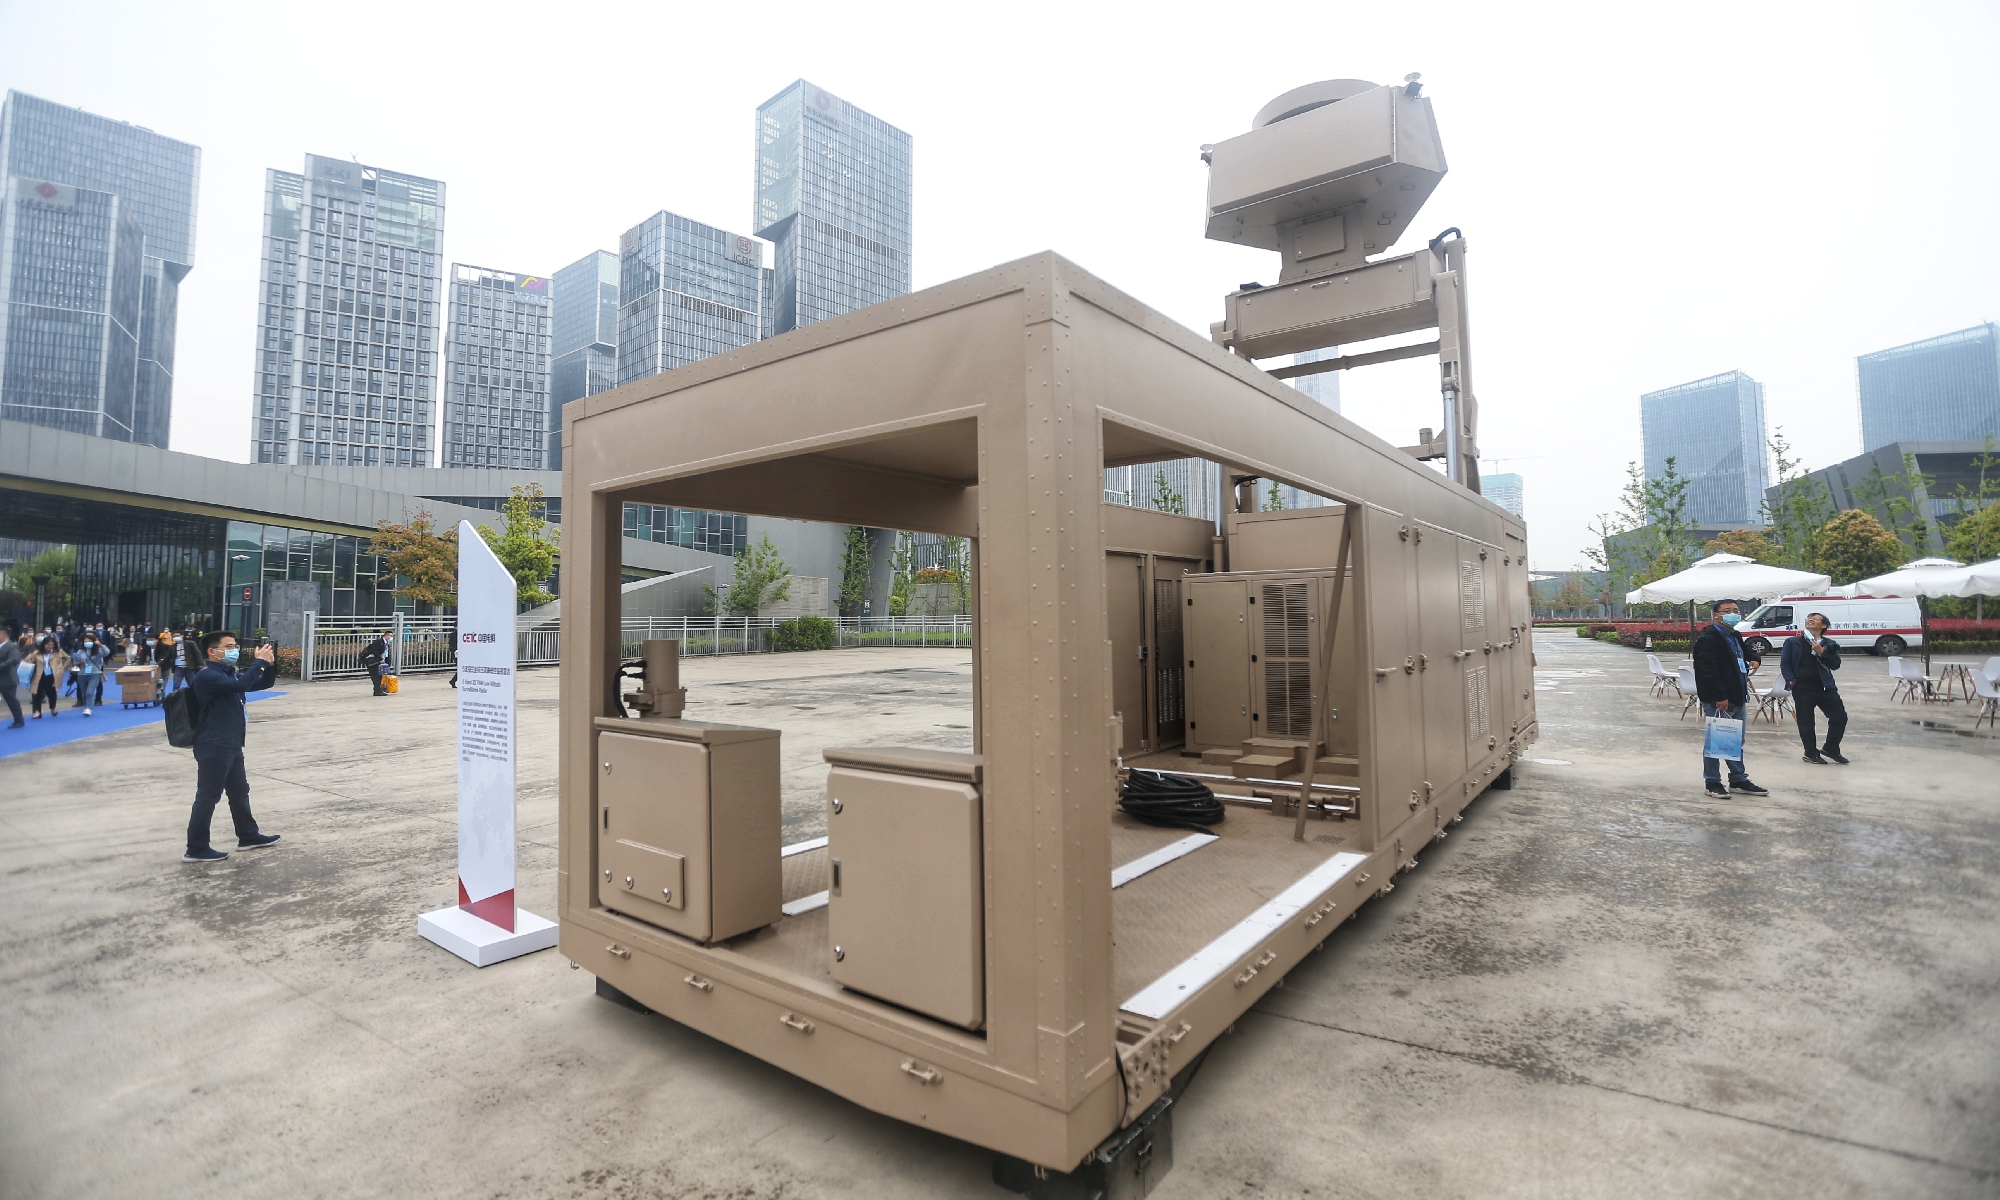 An S-band 3D TWA low-altitude surveillance radar developed by China Electronics Technology Group Co is on display at the 9th World Radar Expo in Nanjing, East China's Jiangsu Province on April 23, 2021. Photo: Cui Meng/GT